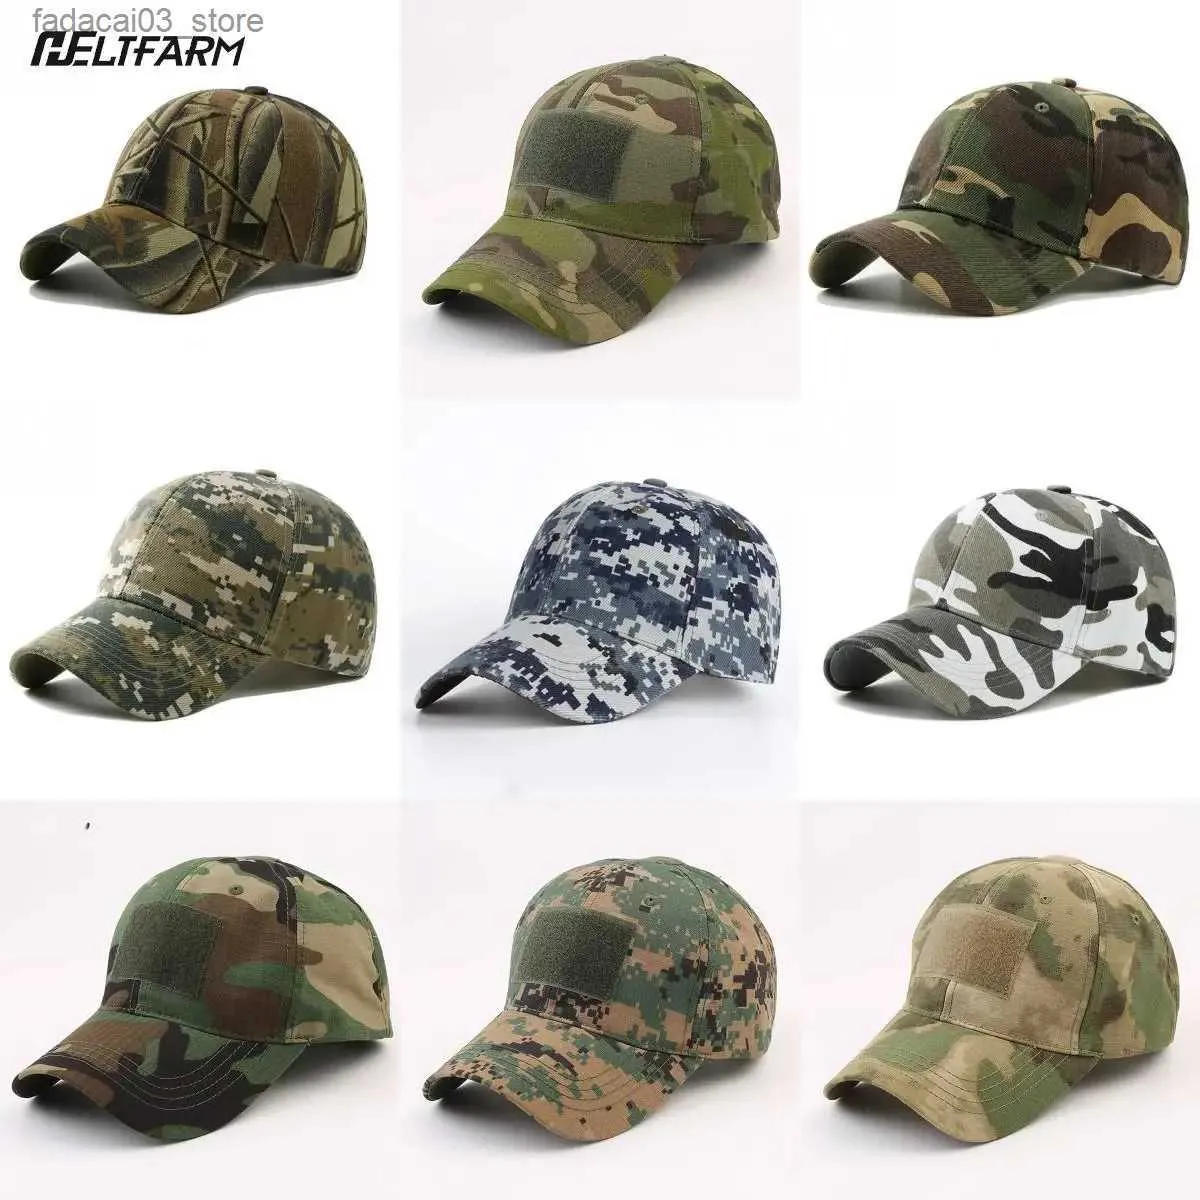 Ball Caps Adjustable Baseball Cap Tactical Summer Sunscreen Hat Camouflage Military Army Camo Airsoft Hunting Camping Hiking Fishing Caps Q240116